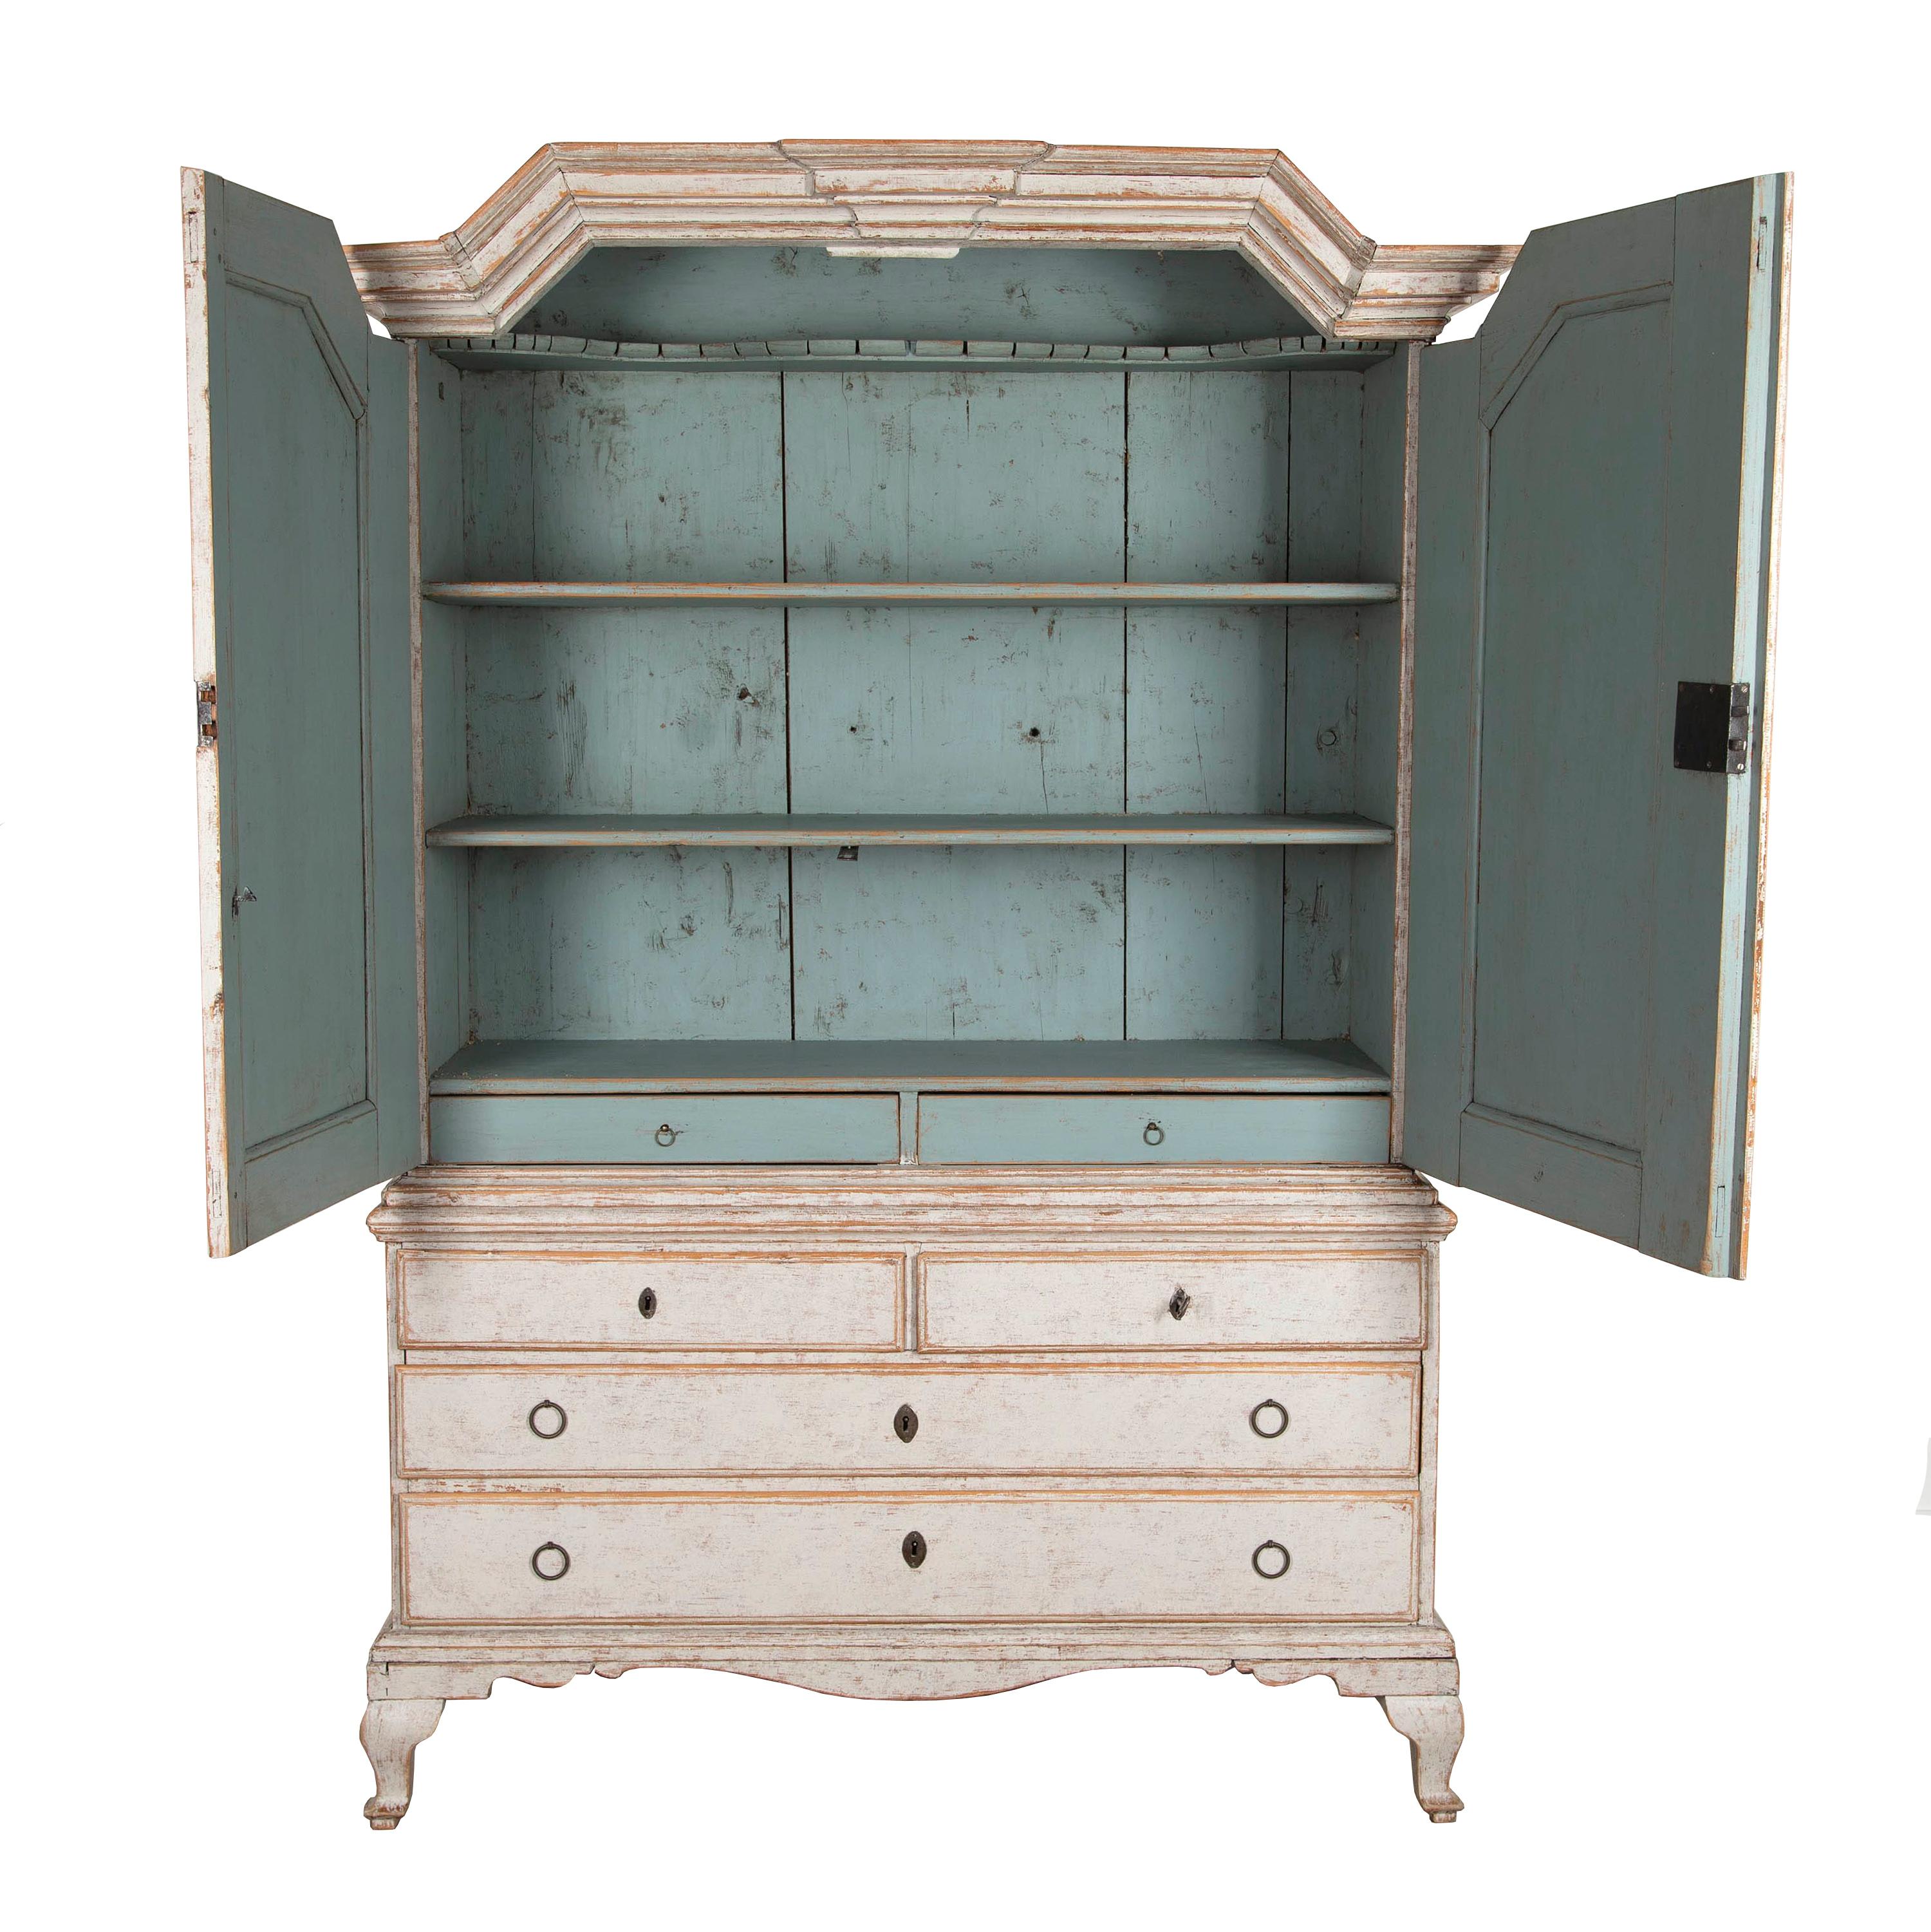 Impressive period Baroque cabinet in two parts. This cabinet has been later painted with light grey paint. 
Featuring a decorative bonnet top and a column-carved pediment that supports two large panelled doors that open to useful storage. The